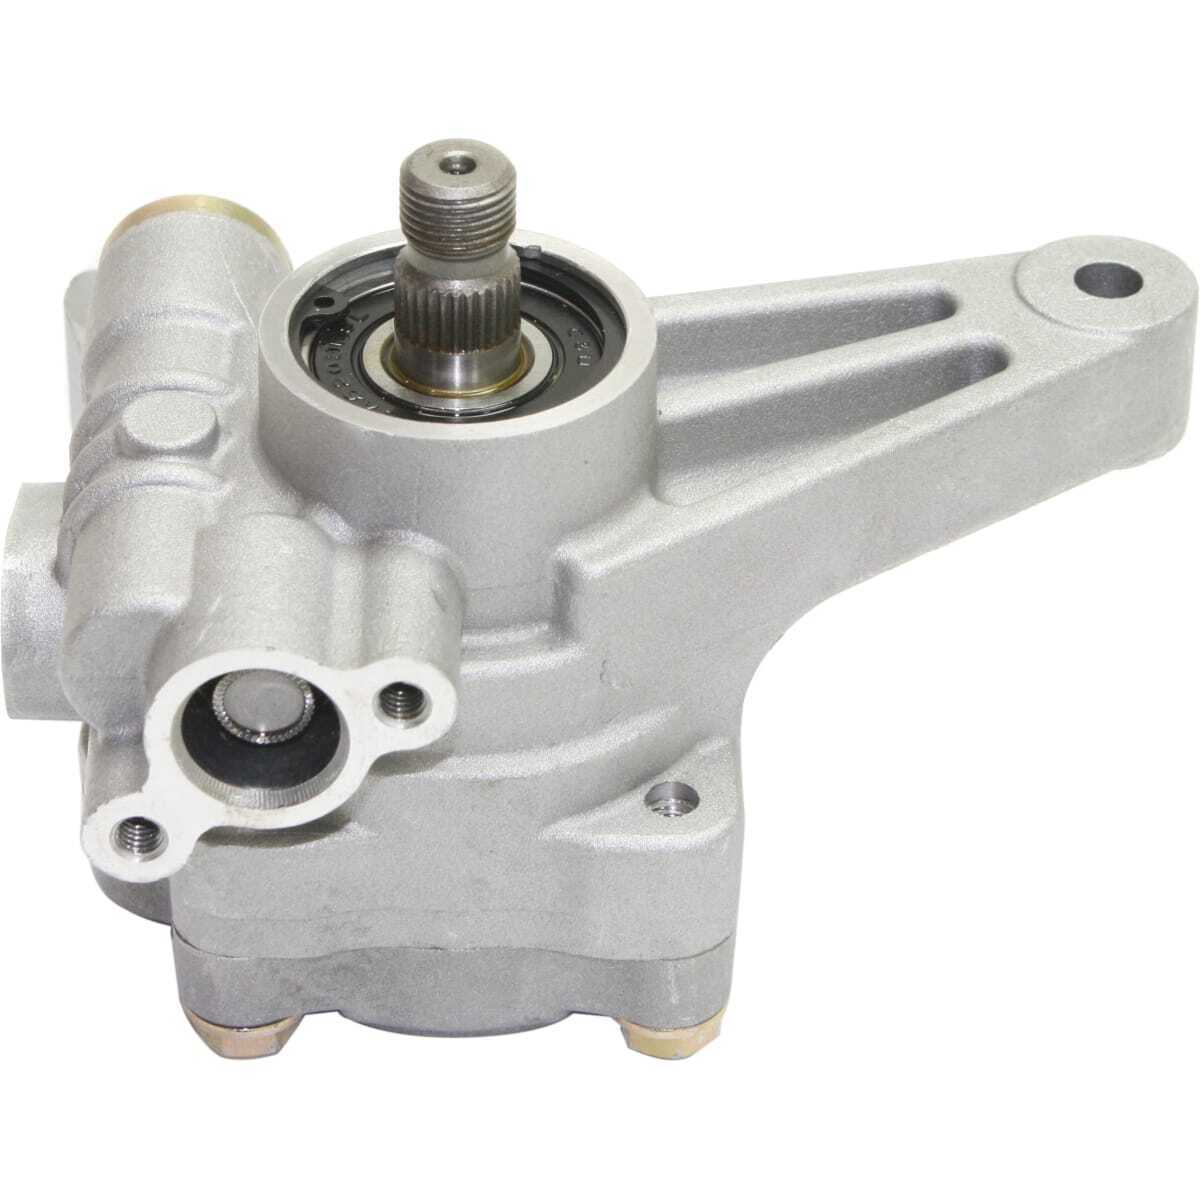 Power Steering Pump For 2005-2008 Honda Pilot EX 3.5L 6 Cyl Without Reservoir